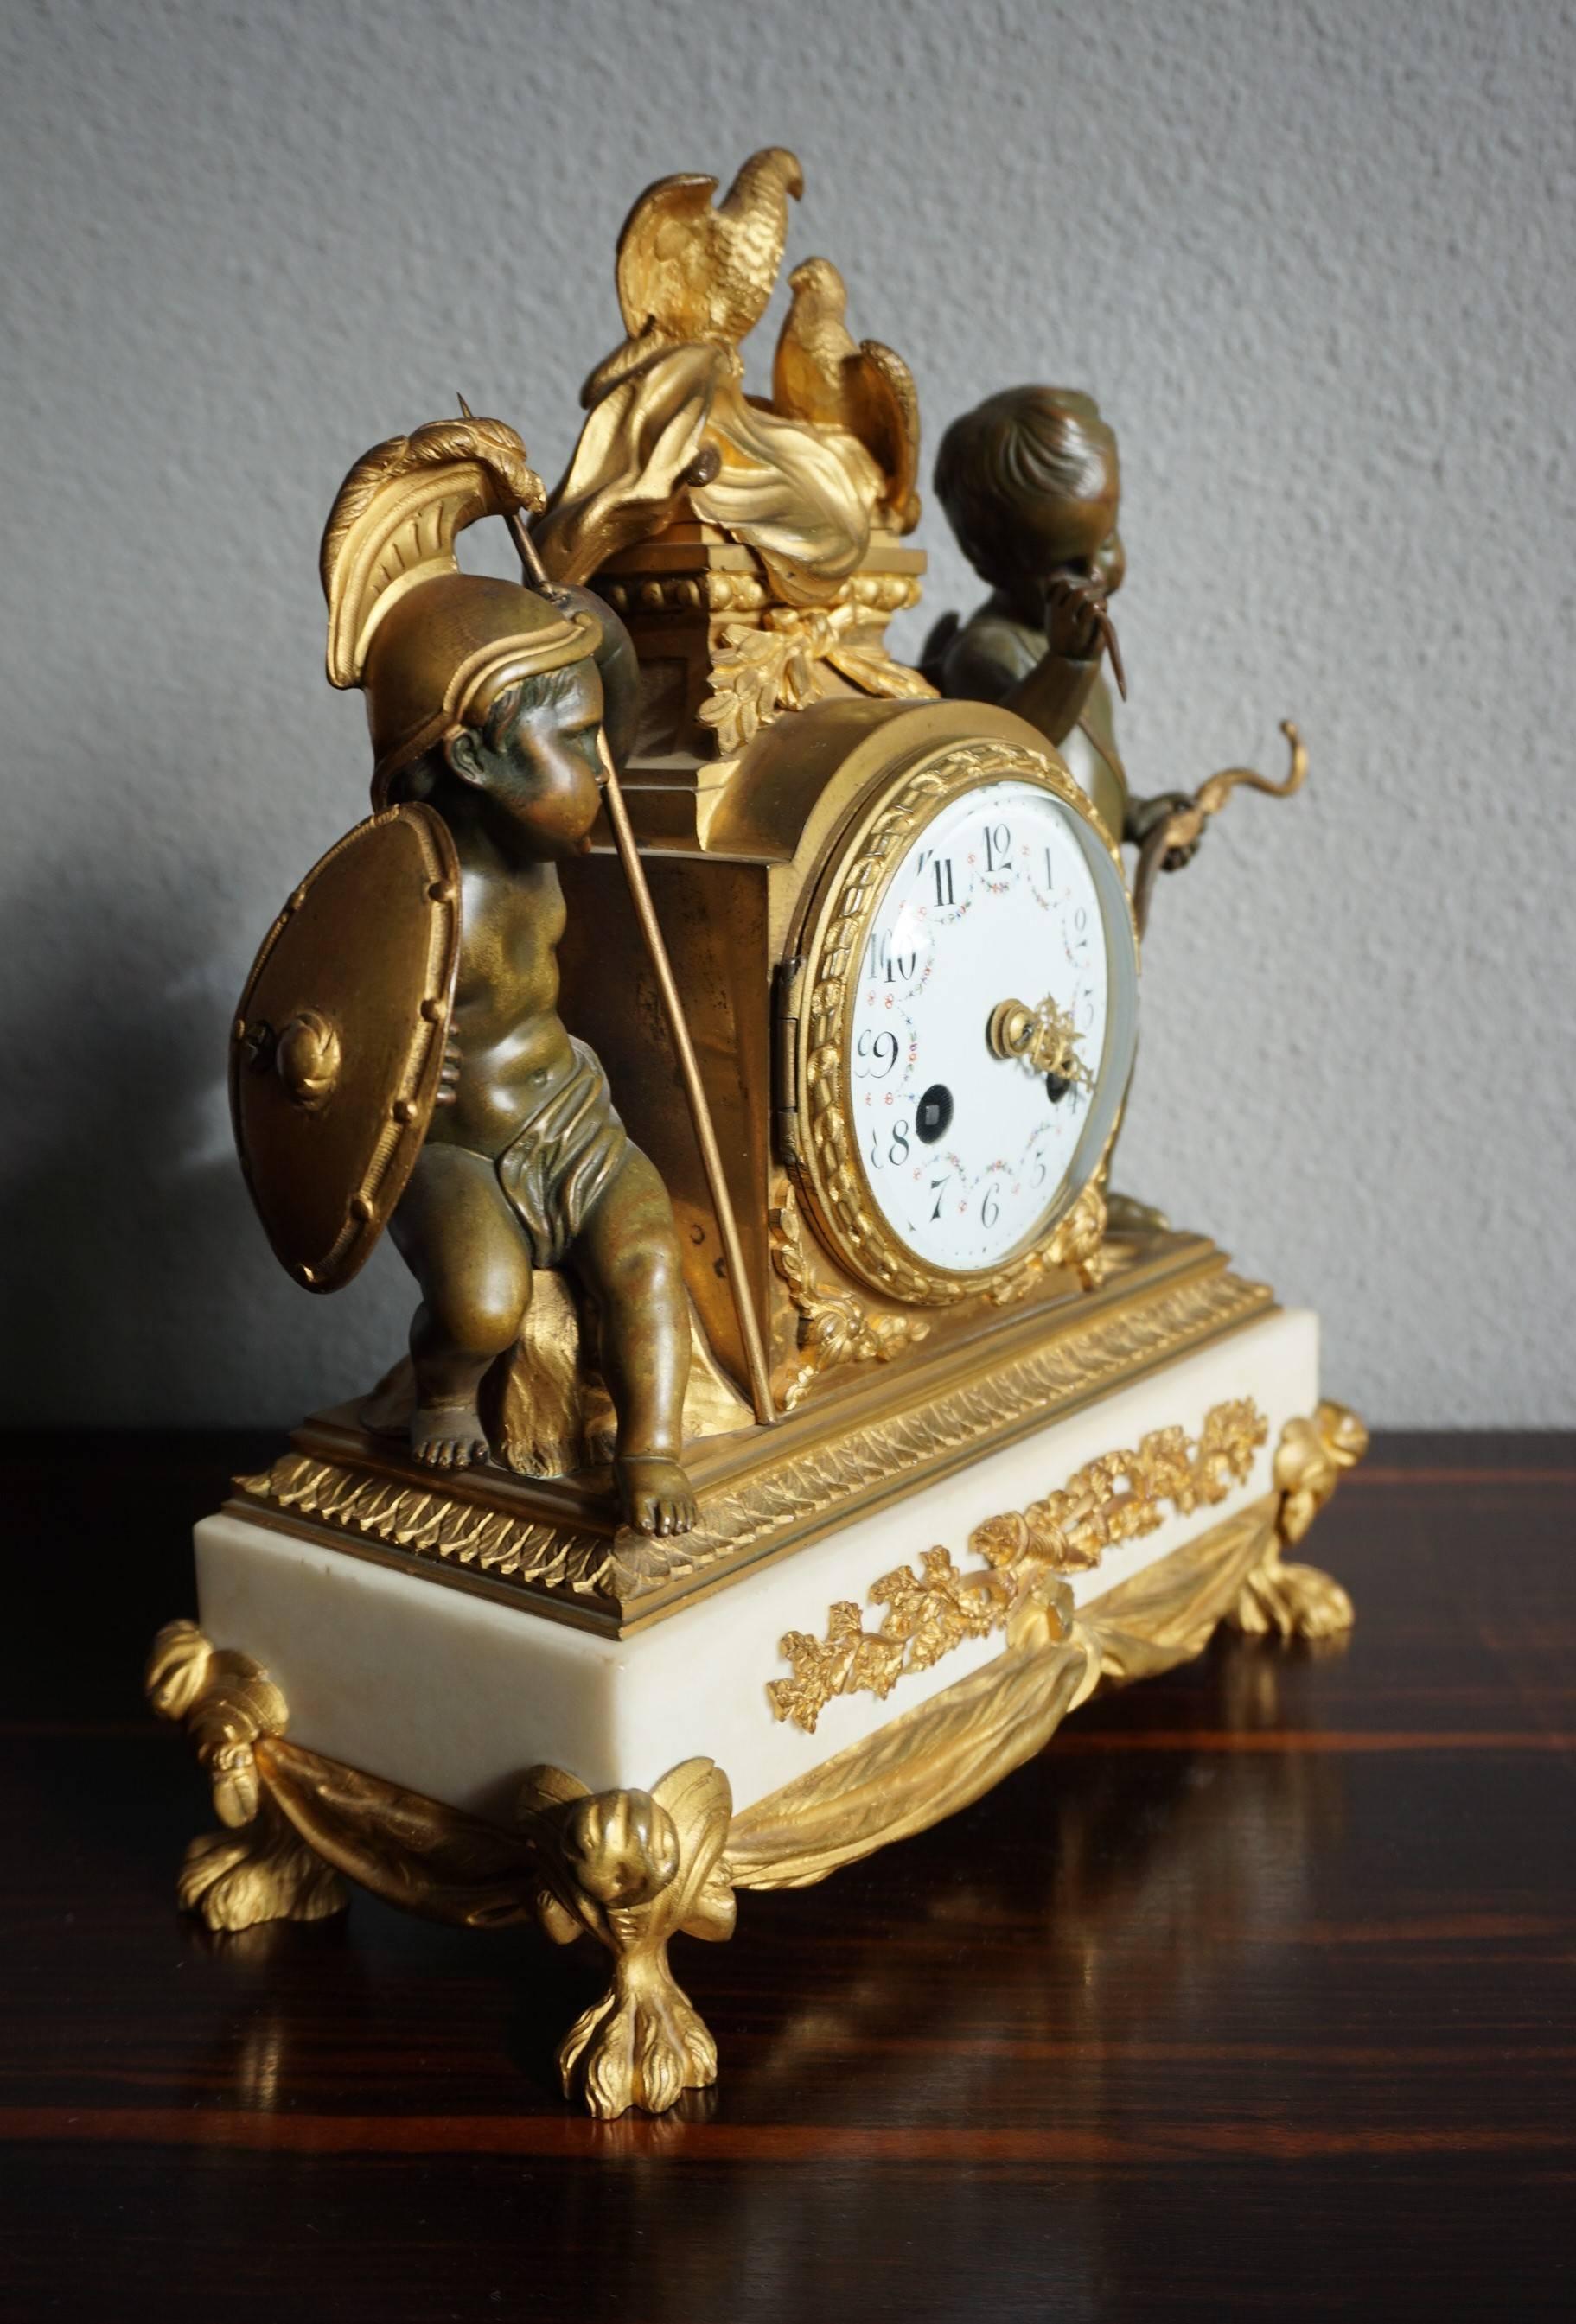 Stunning, French Transition style mantel clock from the 1850s.

This wonderful and meaningful Parisian mantel clock is a rare 19th century edition of an 18th century design by Charles Le Roy. There are only minor differences and this, originally